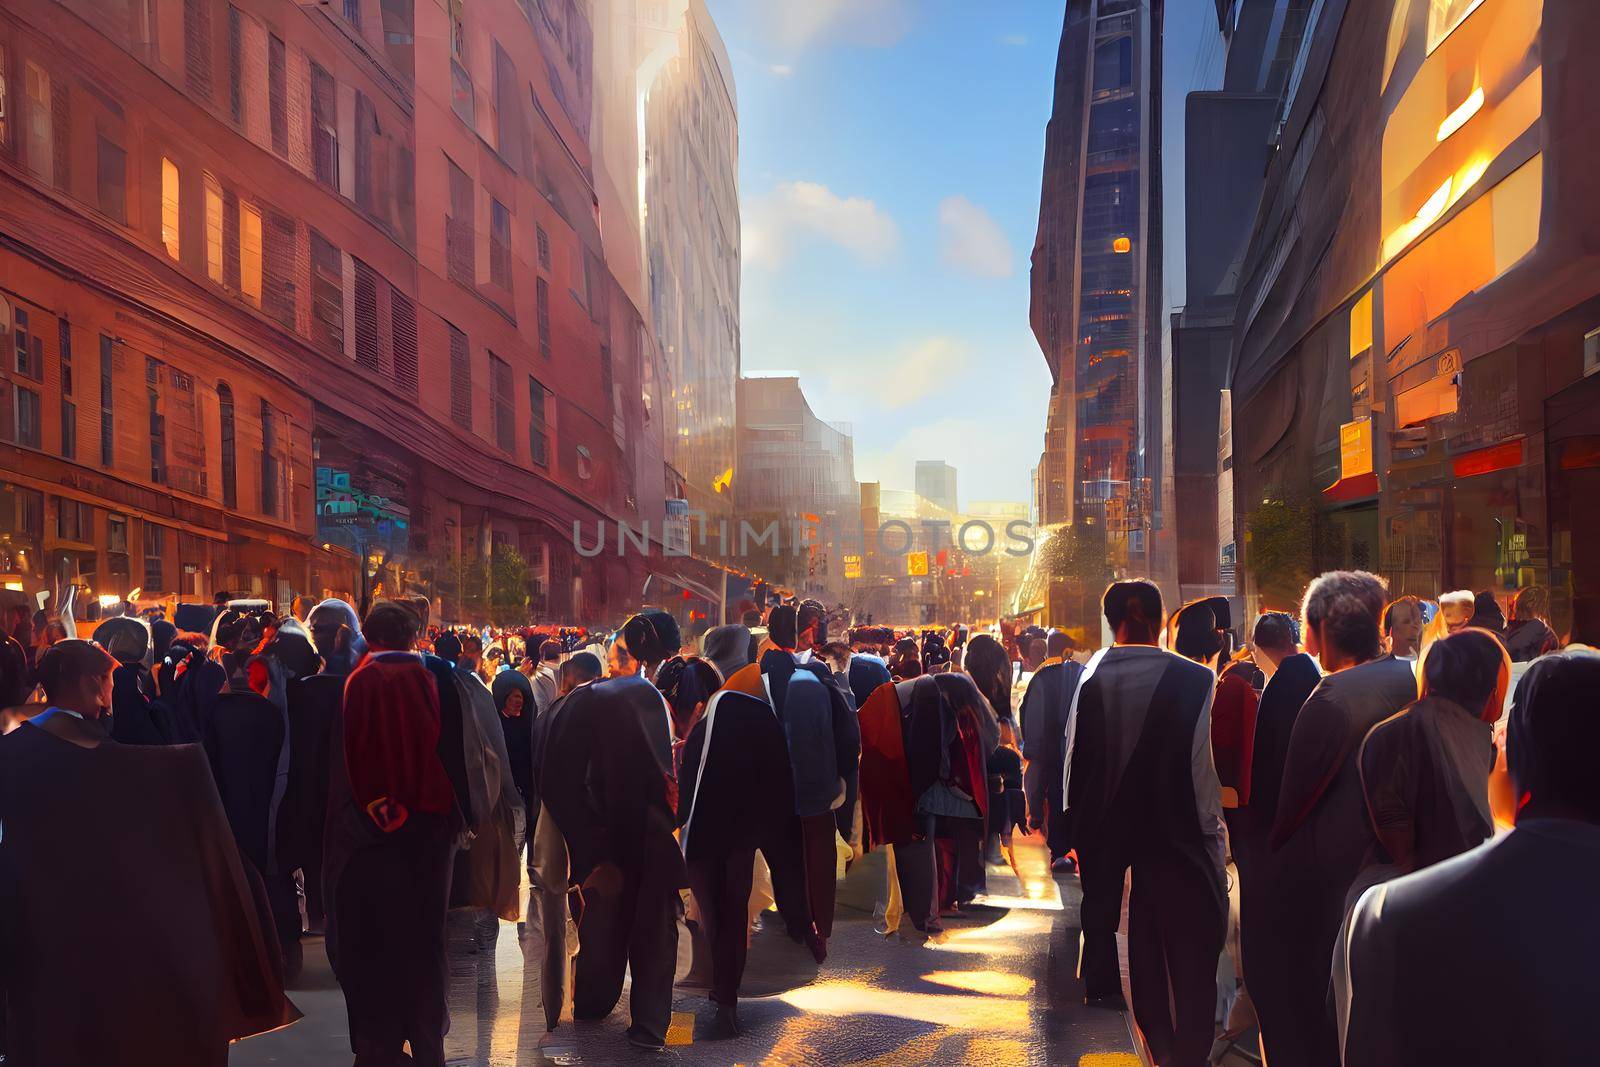 crowd of office suit wearing people walking to work at downtown street, neural network generated art by z1b